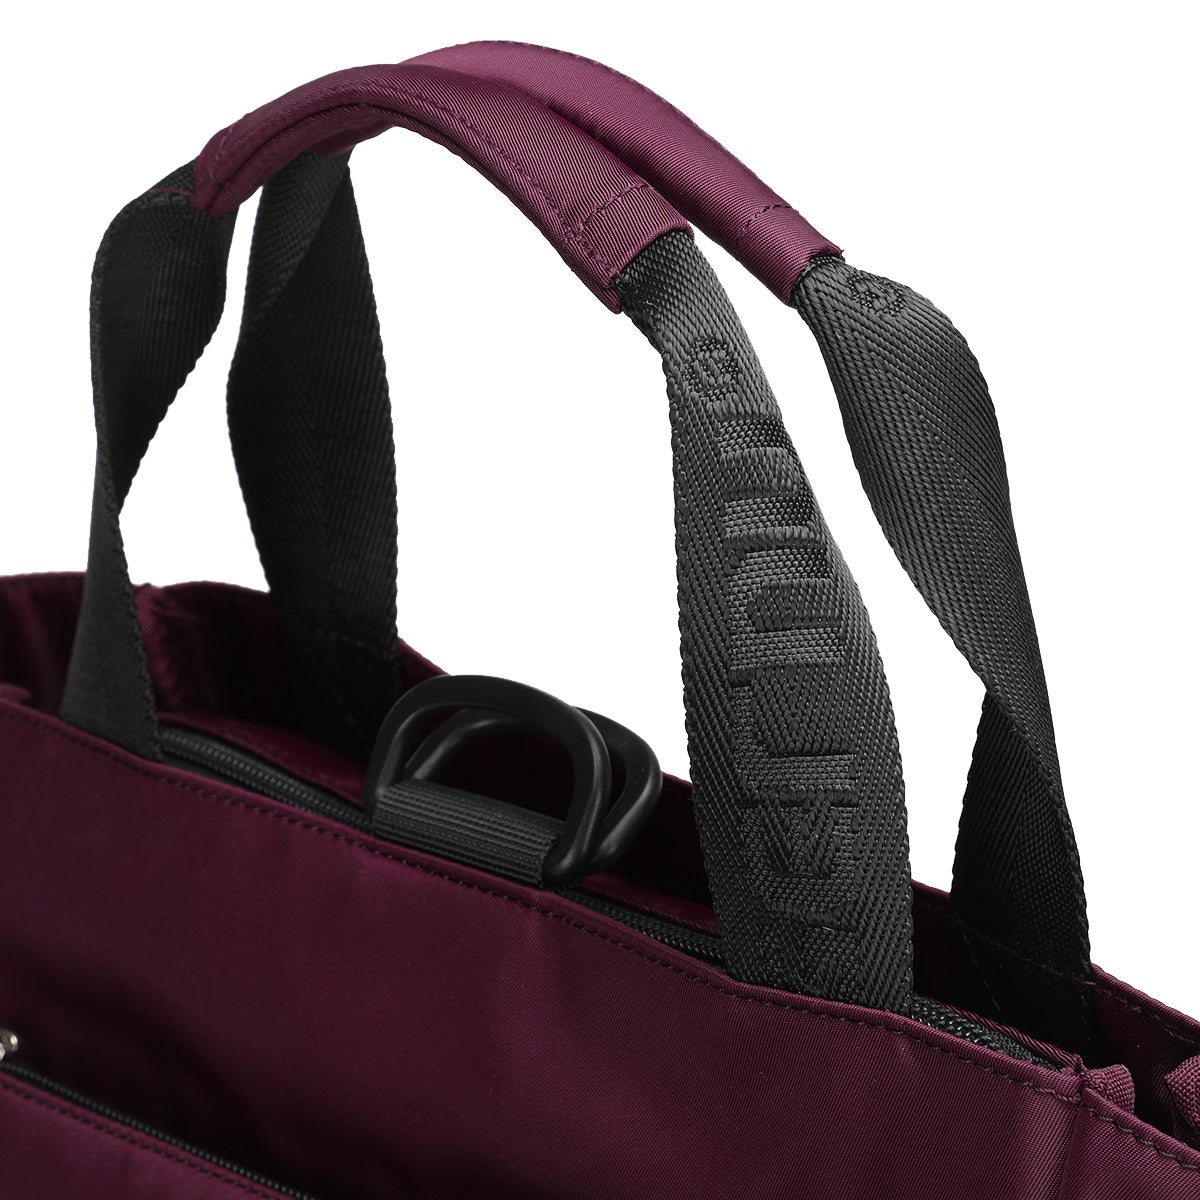 Tigernu T-SL  Casual Tote Backpack for Women Wine